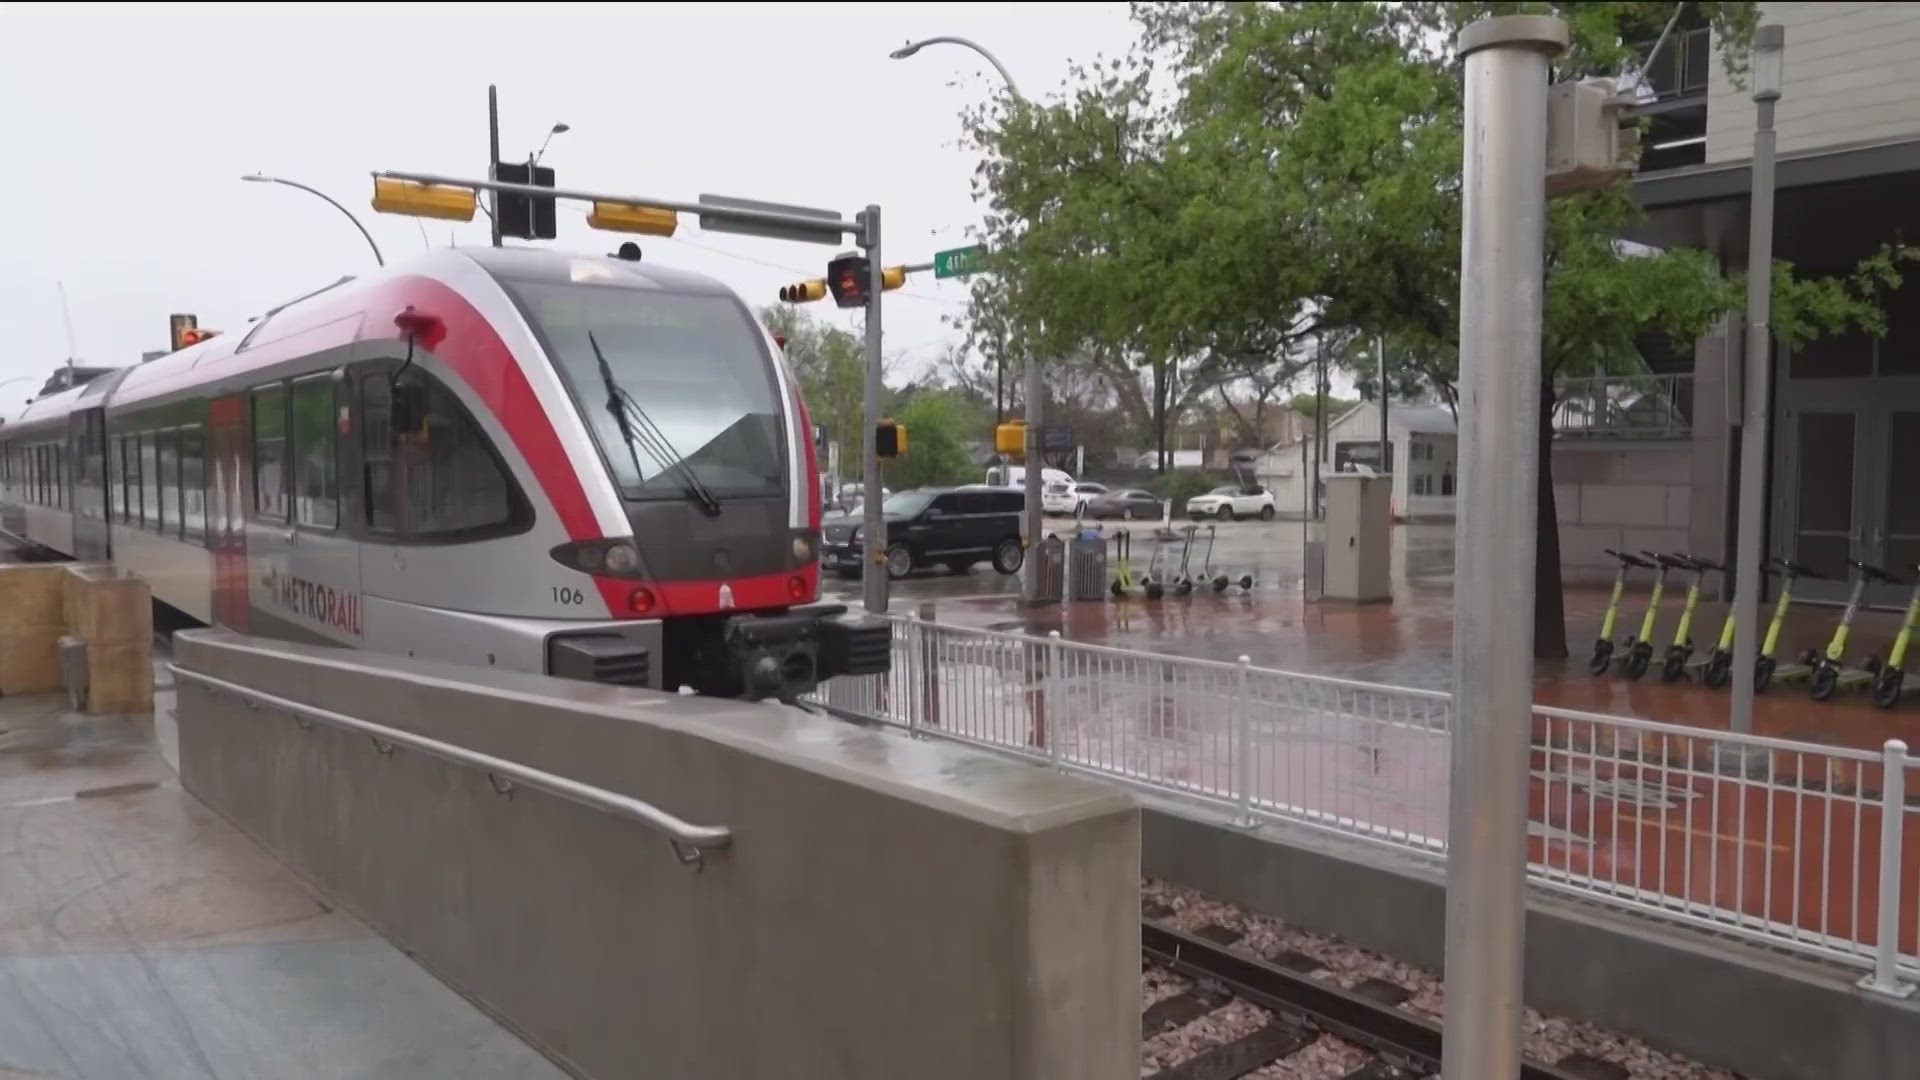 Austin Transit Partnership has announced its recommendation for a new light rail as part of Project Connect.